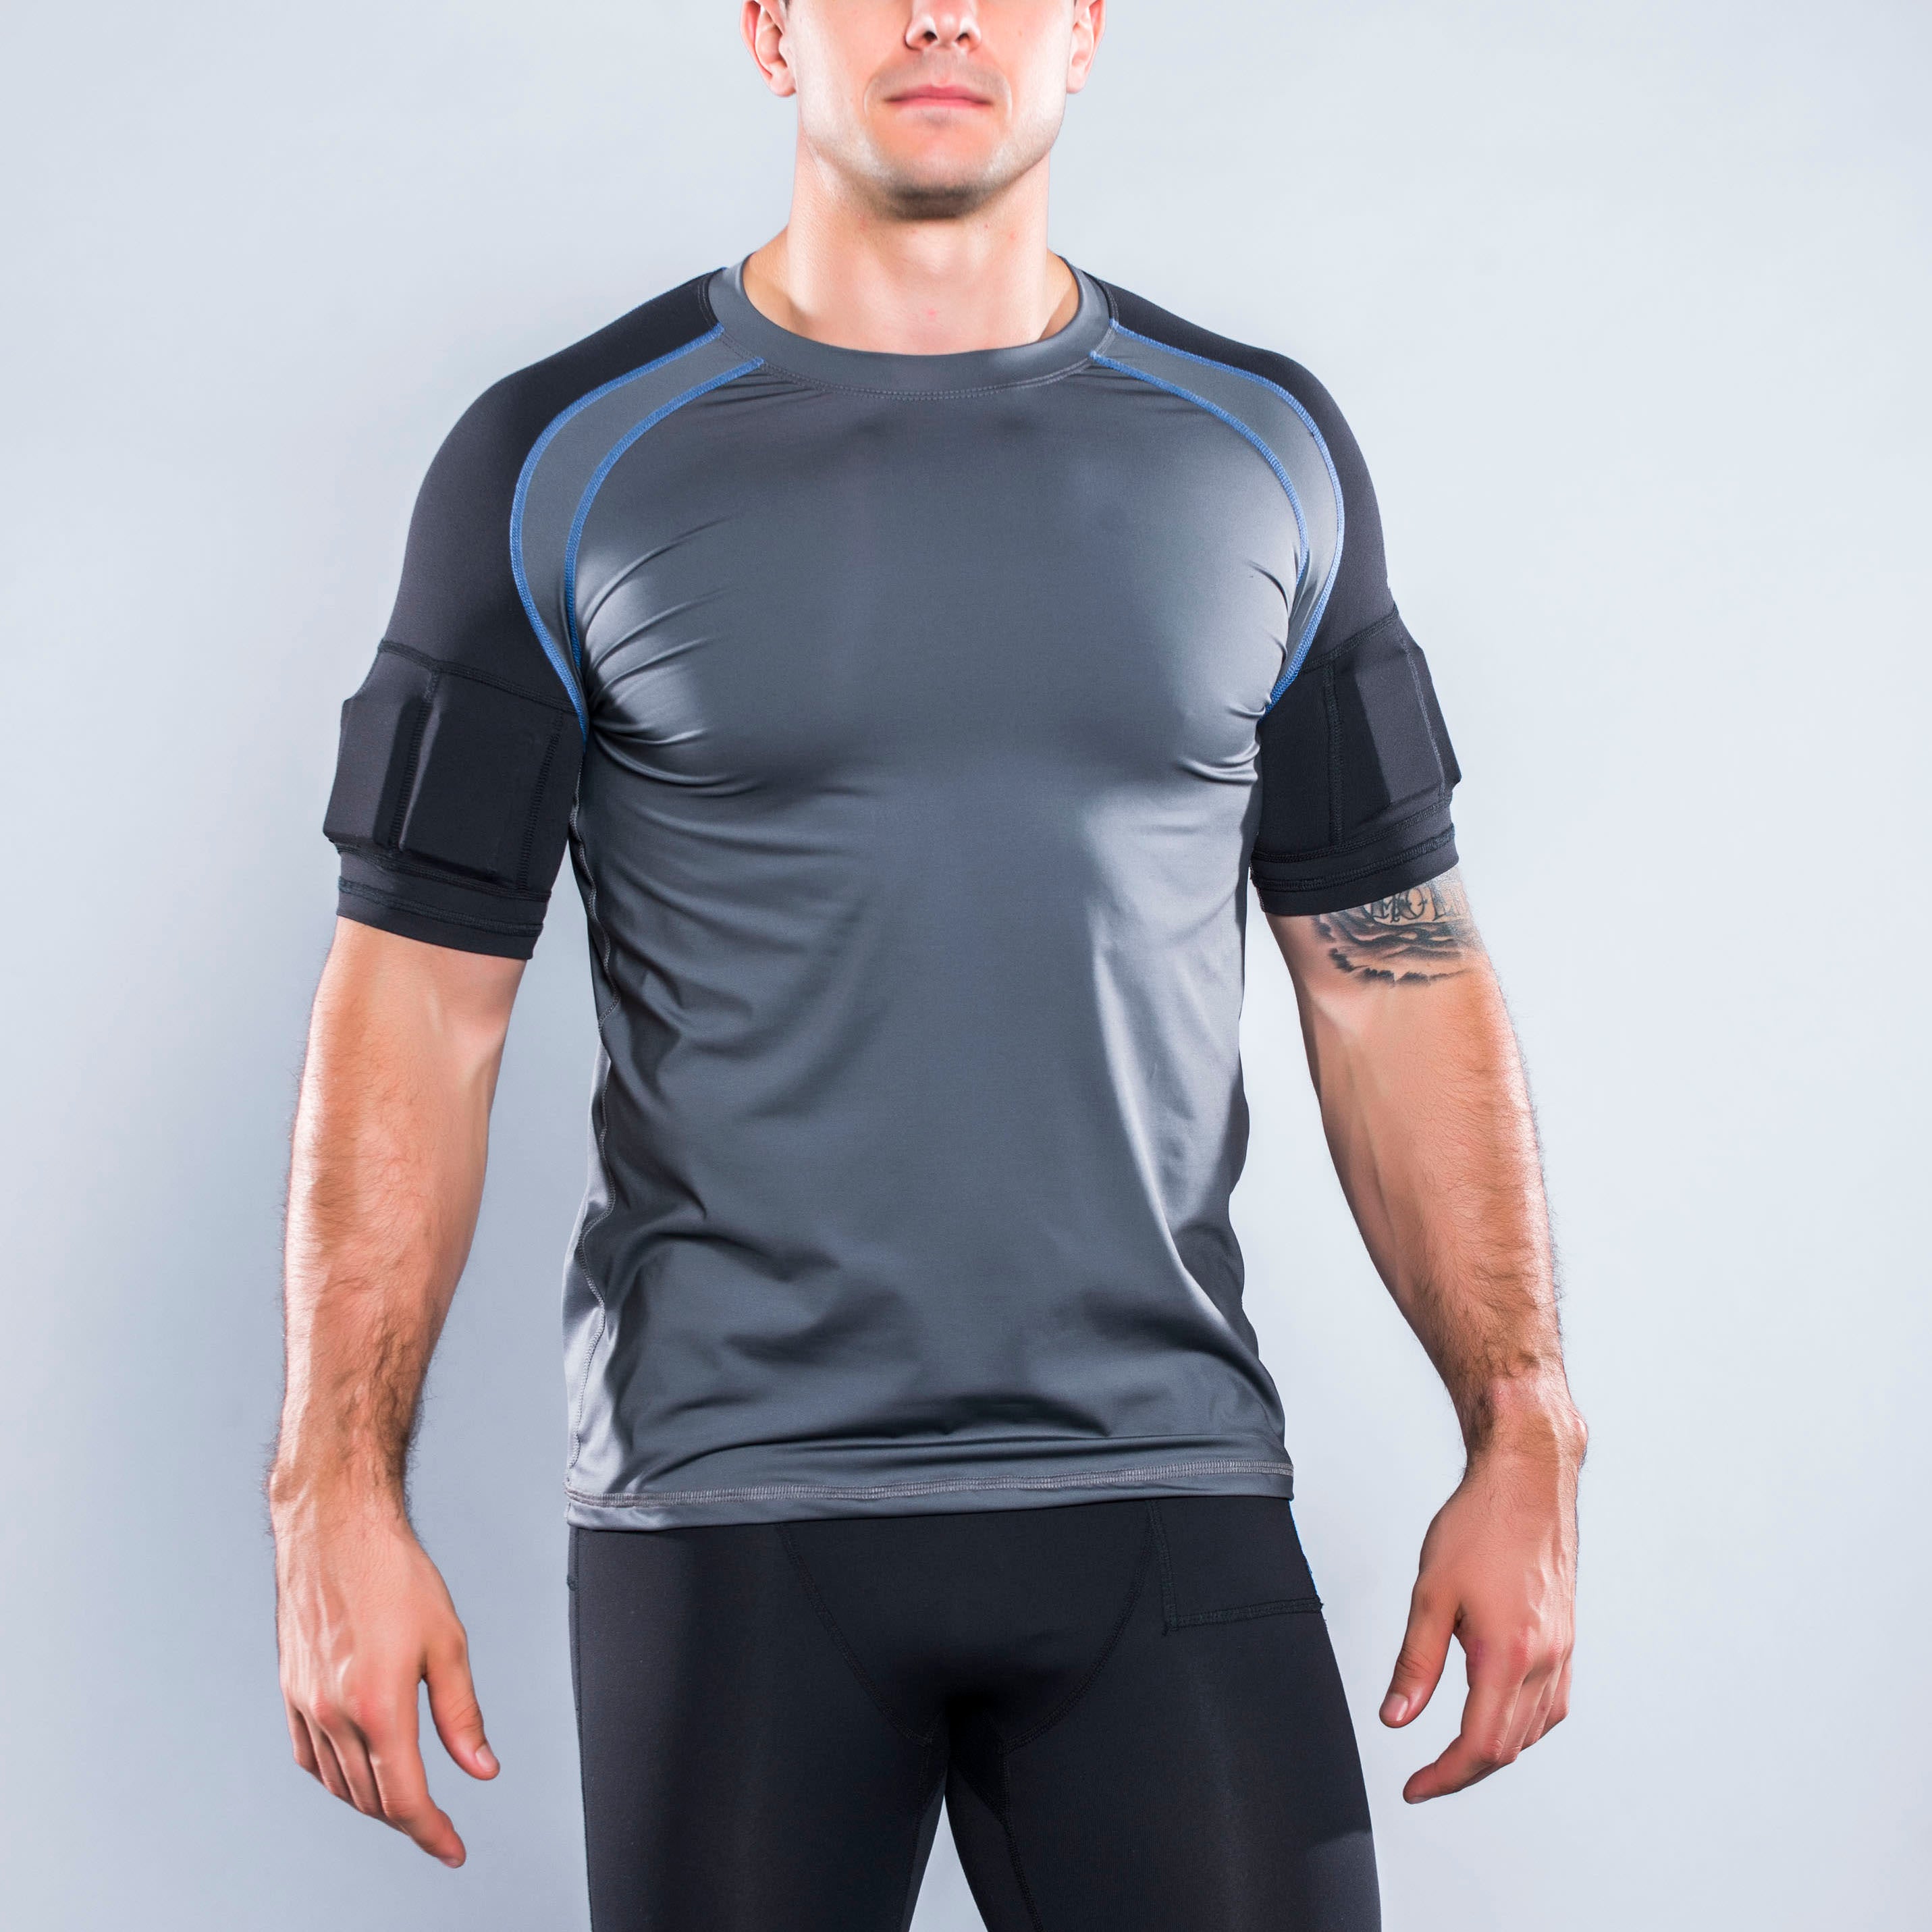 Men's weighted gray and black short sleeve shirt with weights on the arm